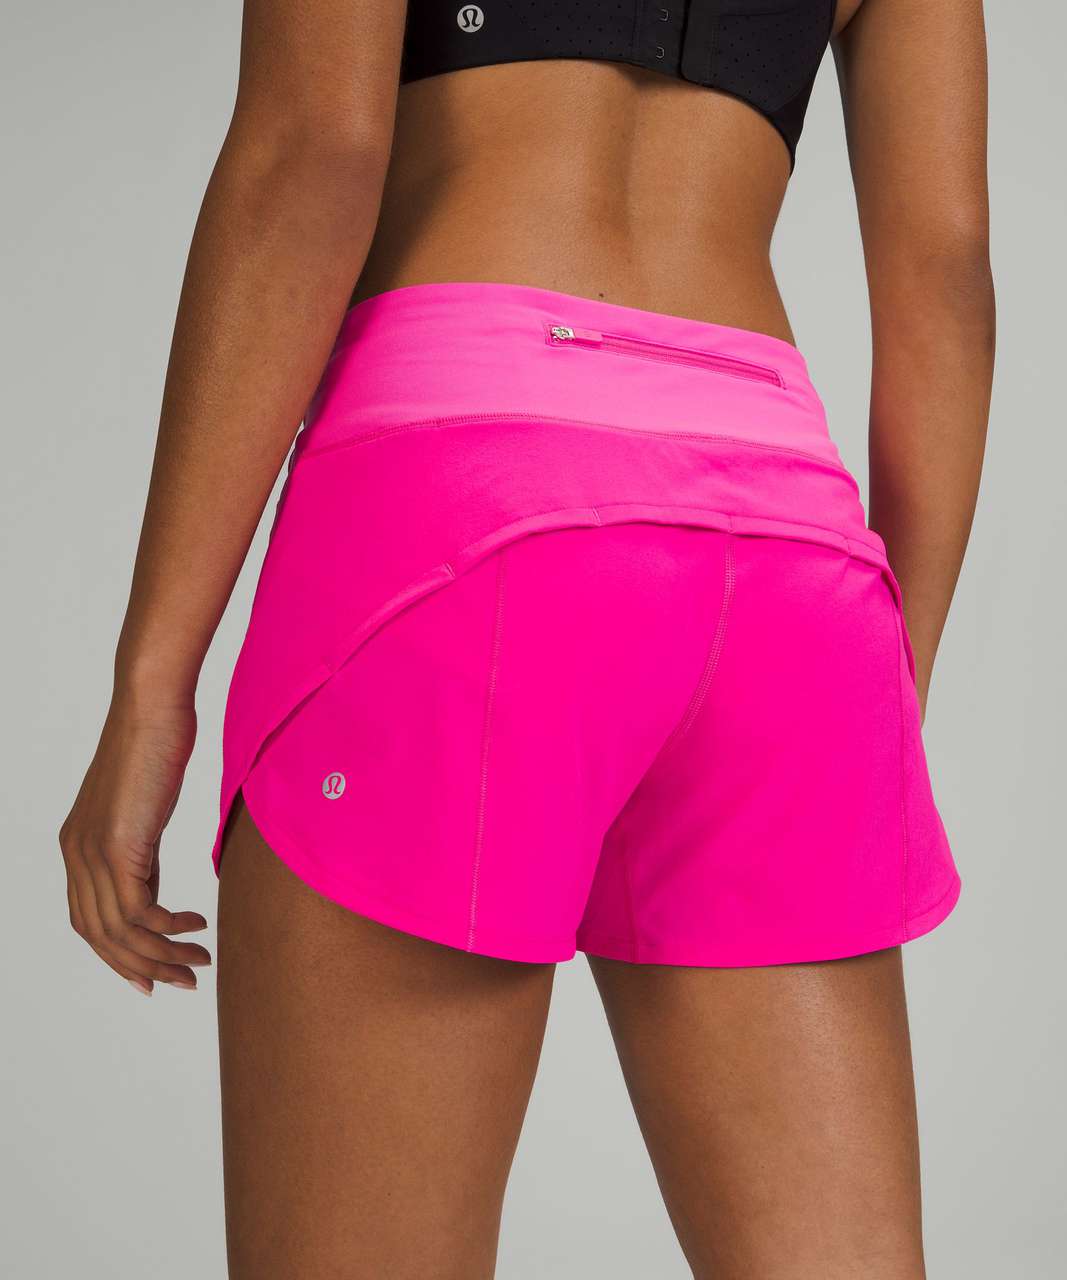 Lululemon Speed Up Mid-Rise Lined Short 4" - Pow Pink